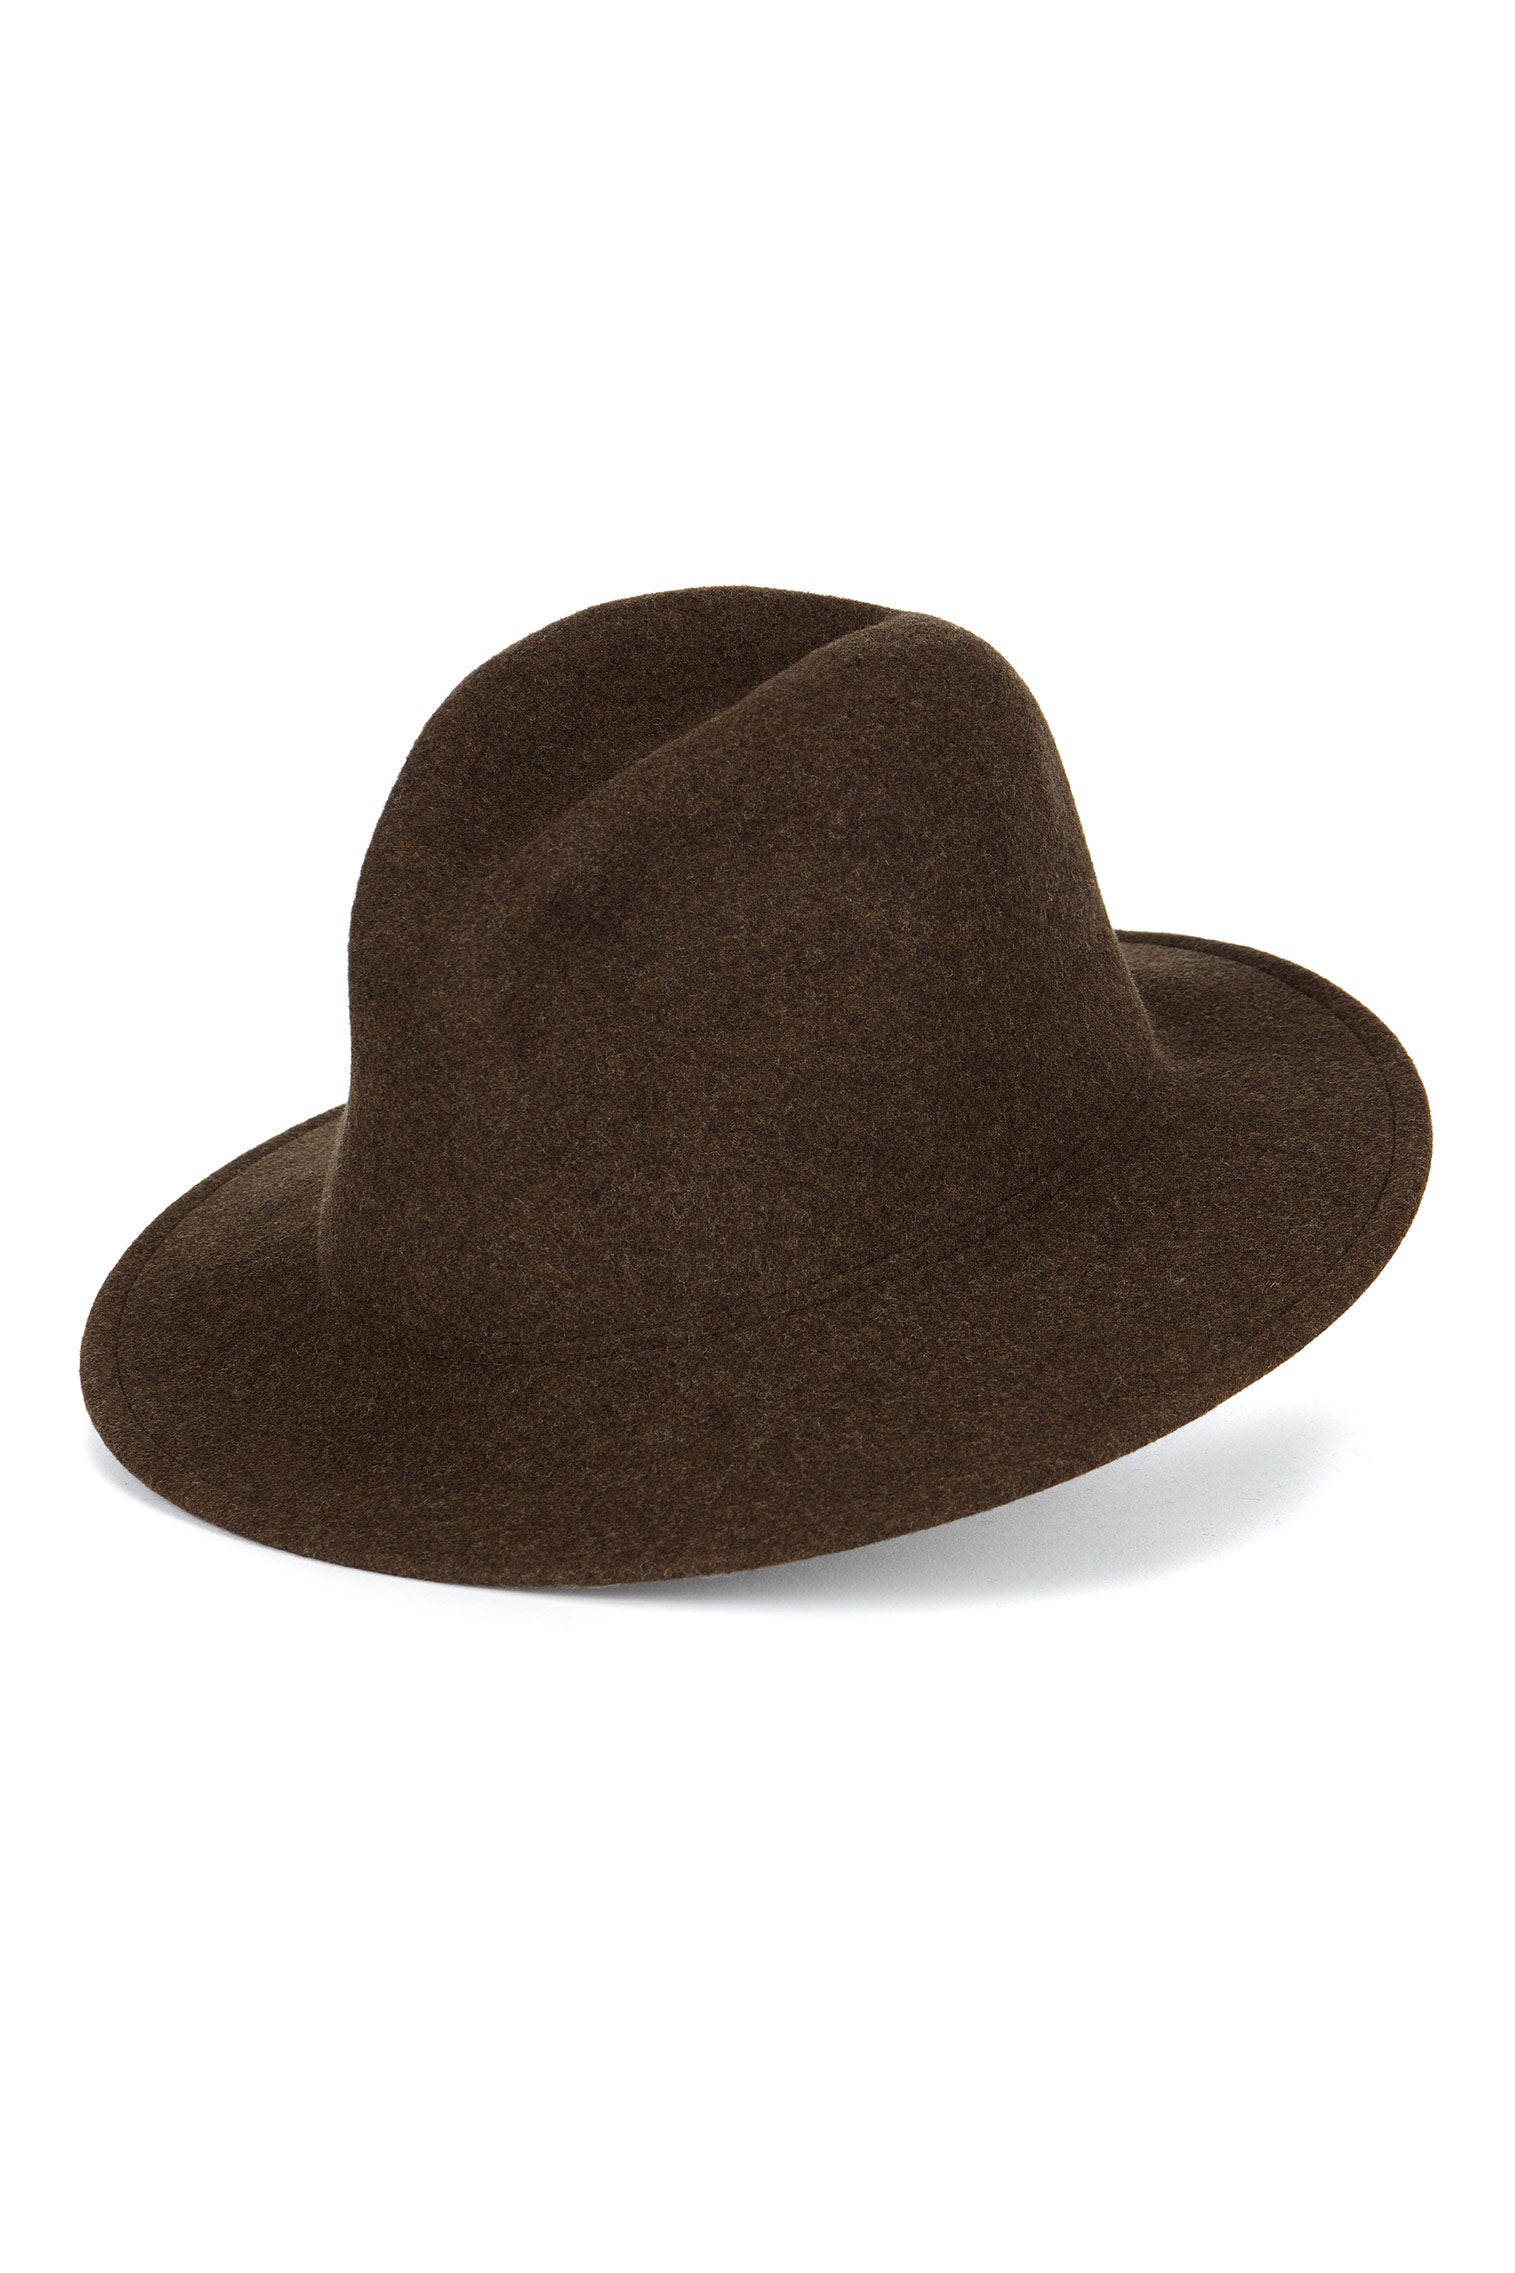 Rambler Rollable Trilby - Father's Day Gift Guide - Lock & Co. Hatters London UK